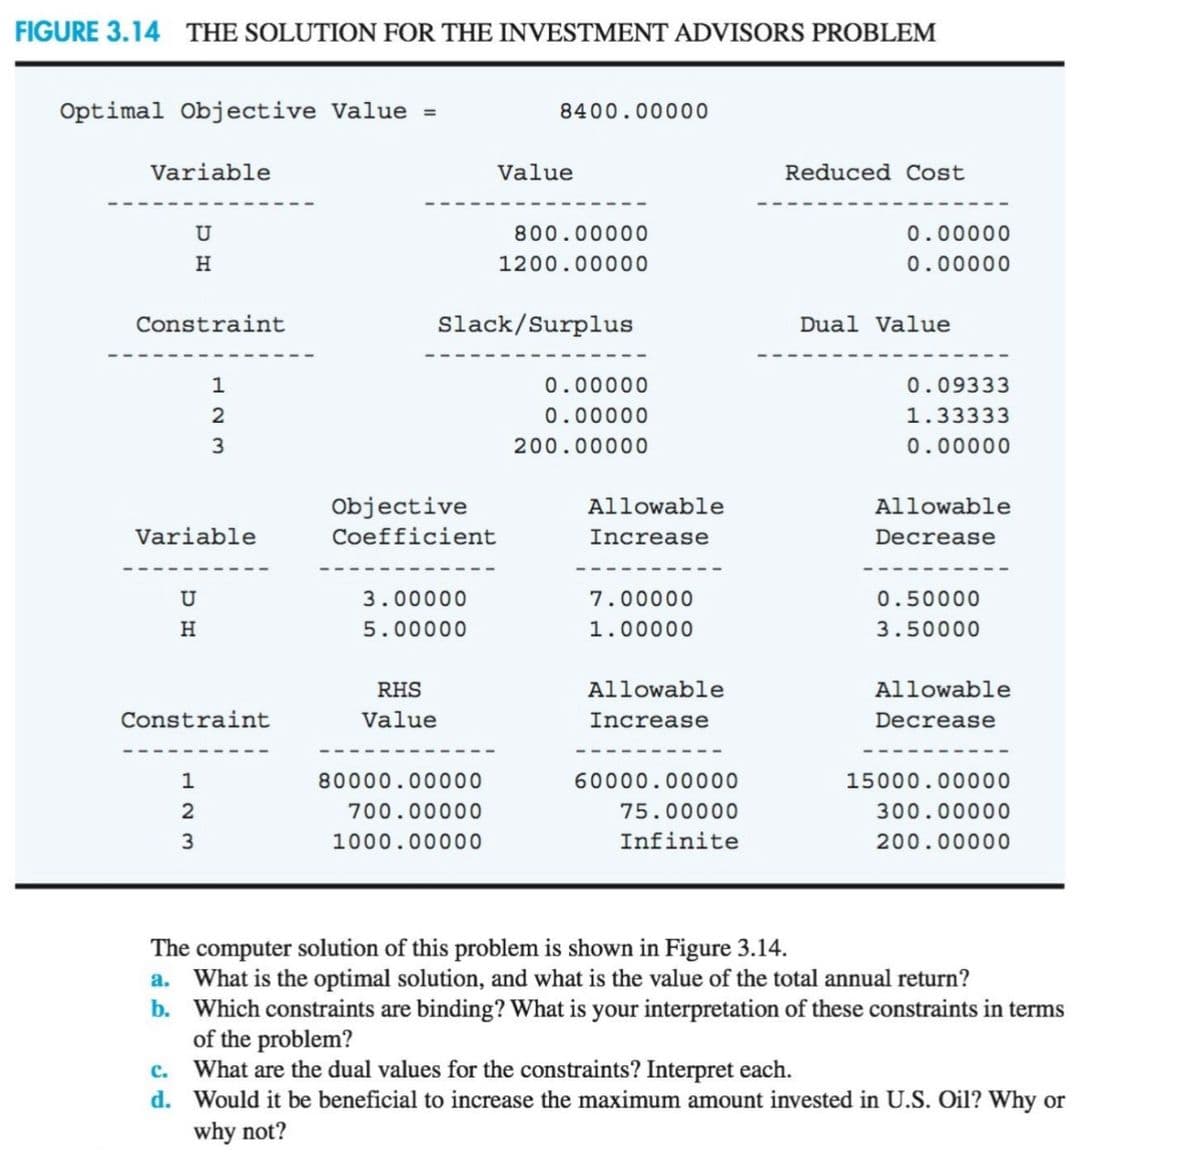 FIGURE 3.14 THE SOLUTION FOR THE INVESTMENT ADVISORS PROBLEM
Optimal Objective Value =
8400.00000
Variable
Value
Reduced Cost
800.00000
0.00000
H
1200.00000
0.00000
Constraint
Slack/Surplus
Dual Value
1
0.00000
0.09333
2
0.00000
1.33333
200.00000
0.00000
Objective
Allowable
Allowable
Variable
Coefficient
Increase
Decrease
3.00000
7.00000
0.50000
H
5.00000
1.00000
3.50000
RHS
Allowable
Allowable
Constraint
Value
Increase
Decrease
1
80000.00000
60000.00000
15000.00000
700.00000
75.00000
300.00000
3.
1000.00000
Infinite
200.00000
The computer solution of this problem is shown in Figure 3.14.
a. What is the optimal solution, and what is the value of the total annual return?
b. Which constraints are binding? What is your interpretation of these constraints in terms
of the problem?
c. What are the dual values for the constraints? Interpret each.
d. Would it be beneficial to increase the maximum amount invested in U.S. Oil? Why or
why not?
